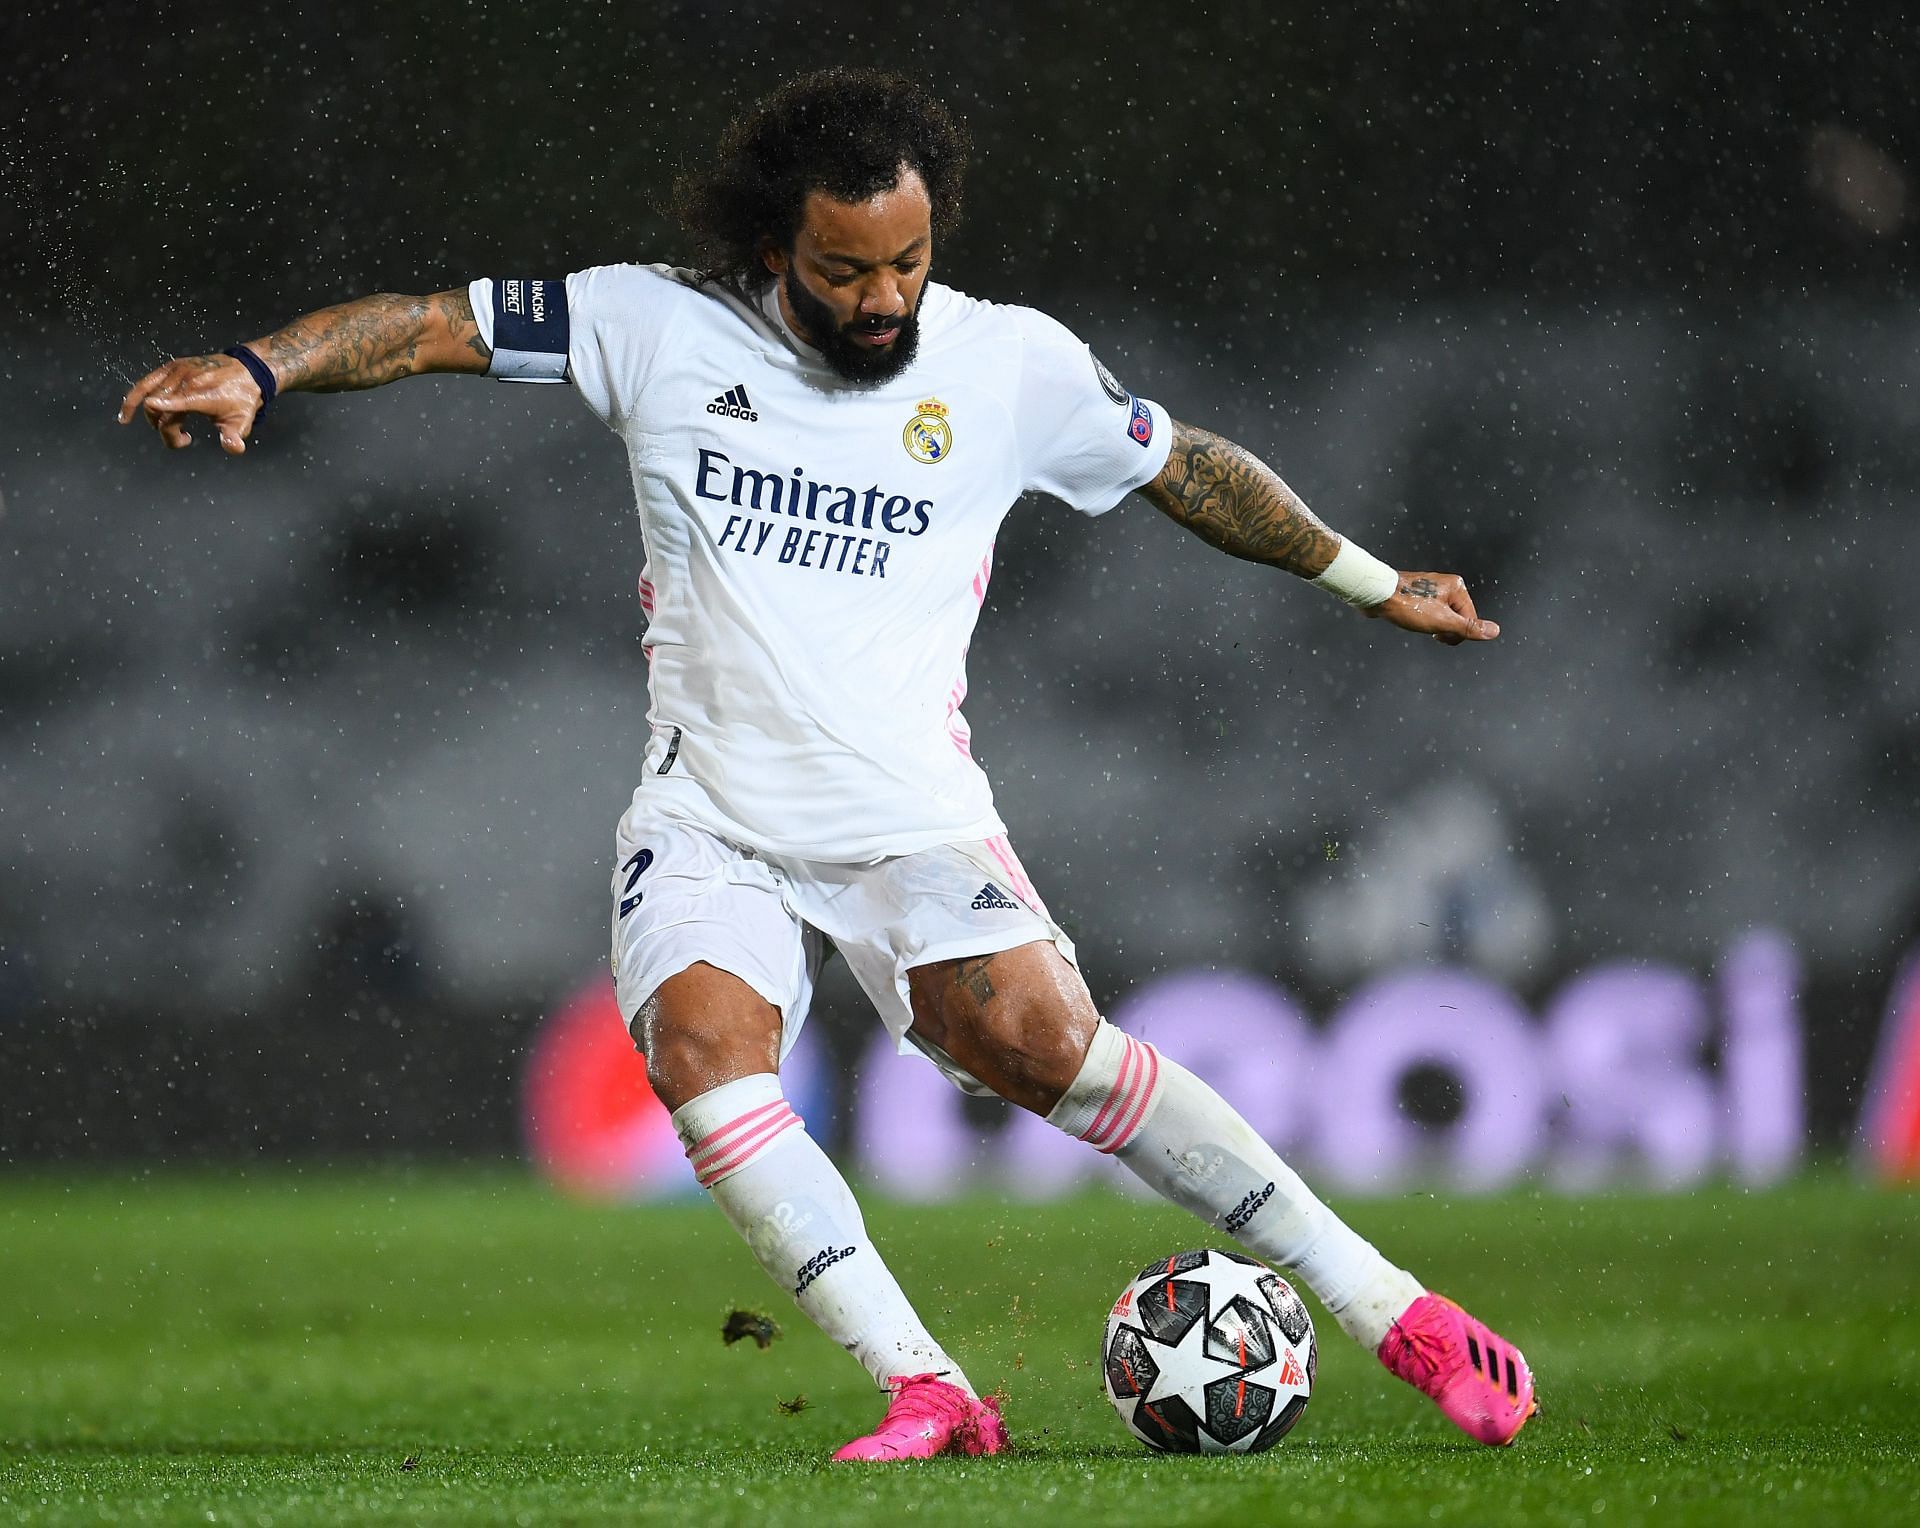 Marcelo is set to leave Real Madrid at the end of the current season.